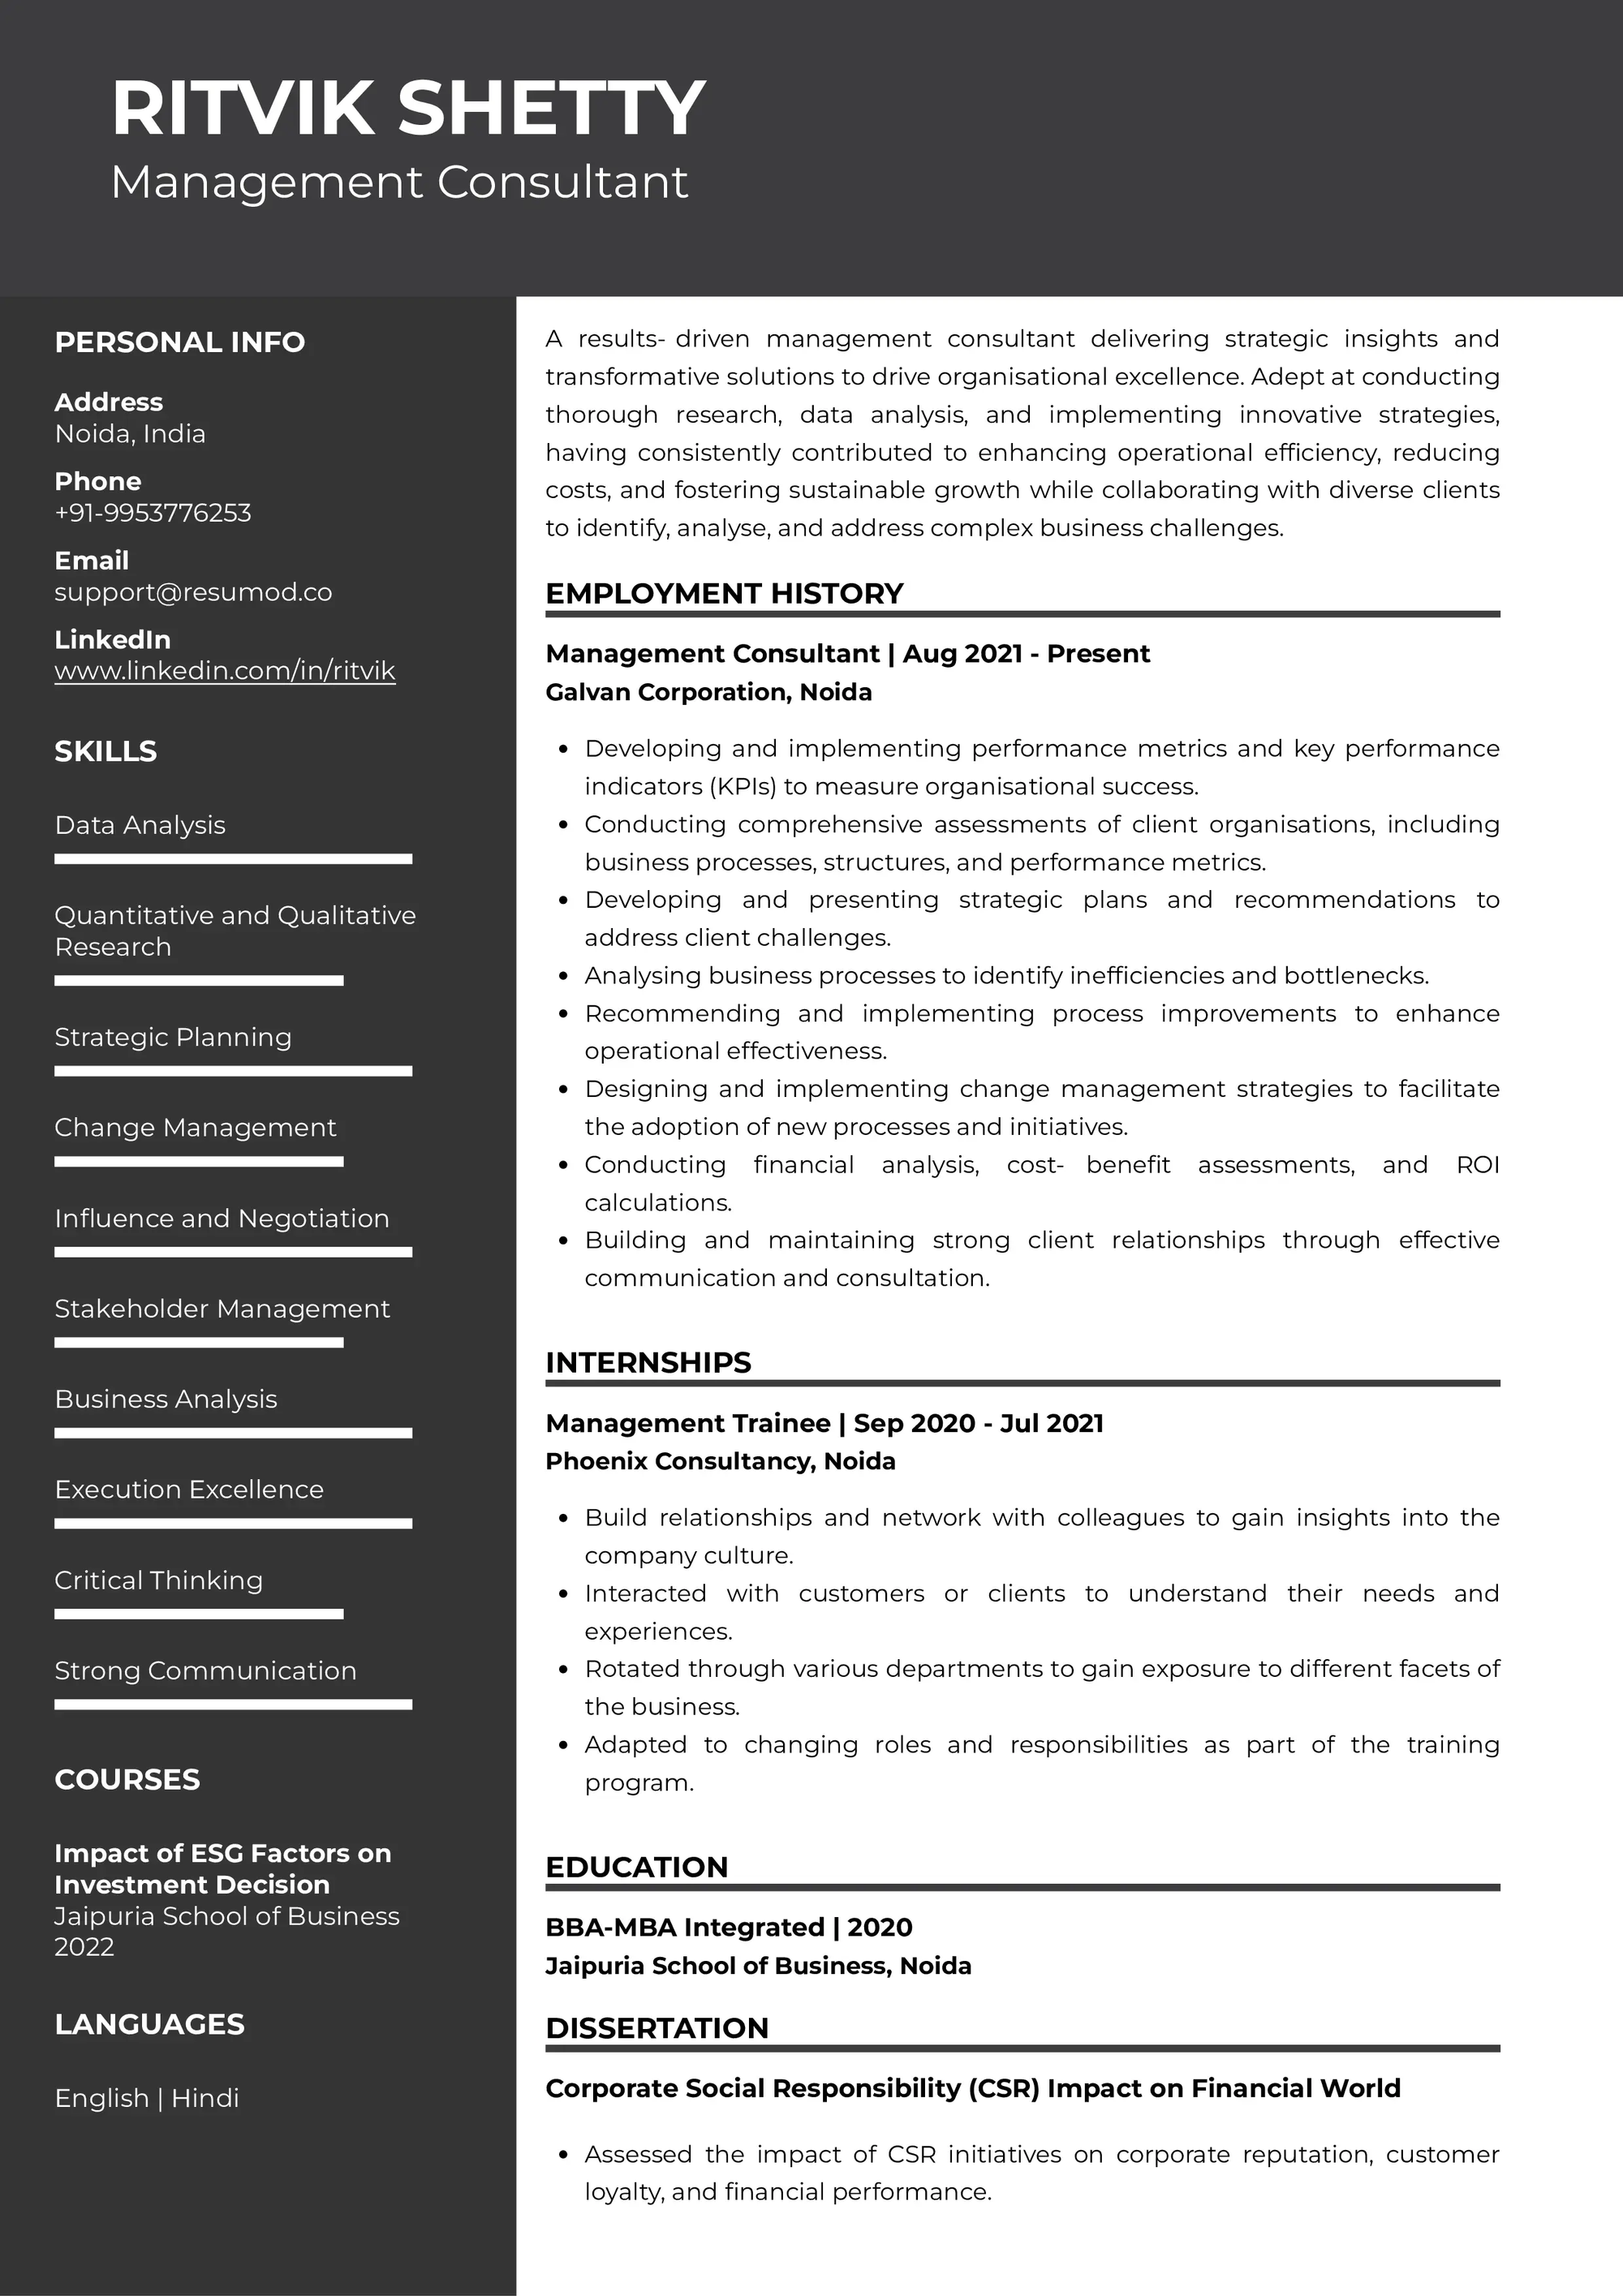 Resume of Management Consultant built on Resumod